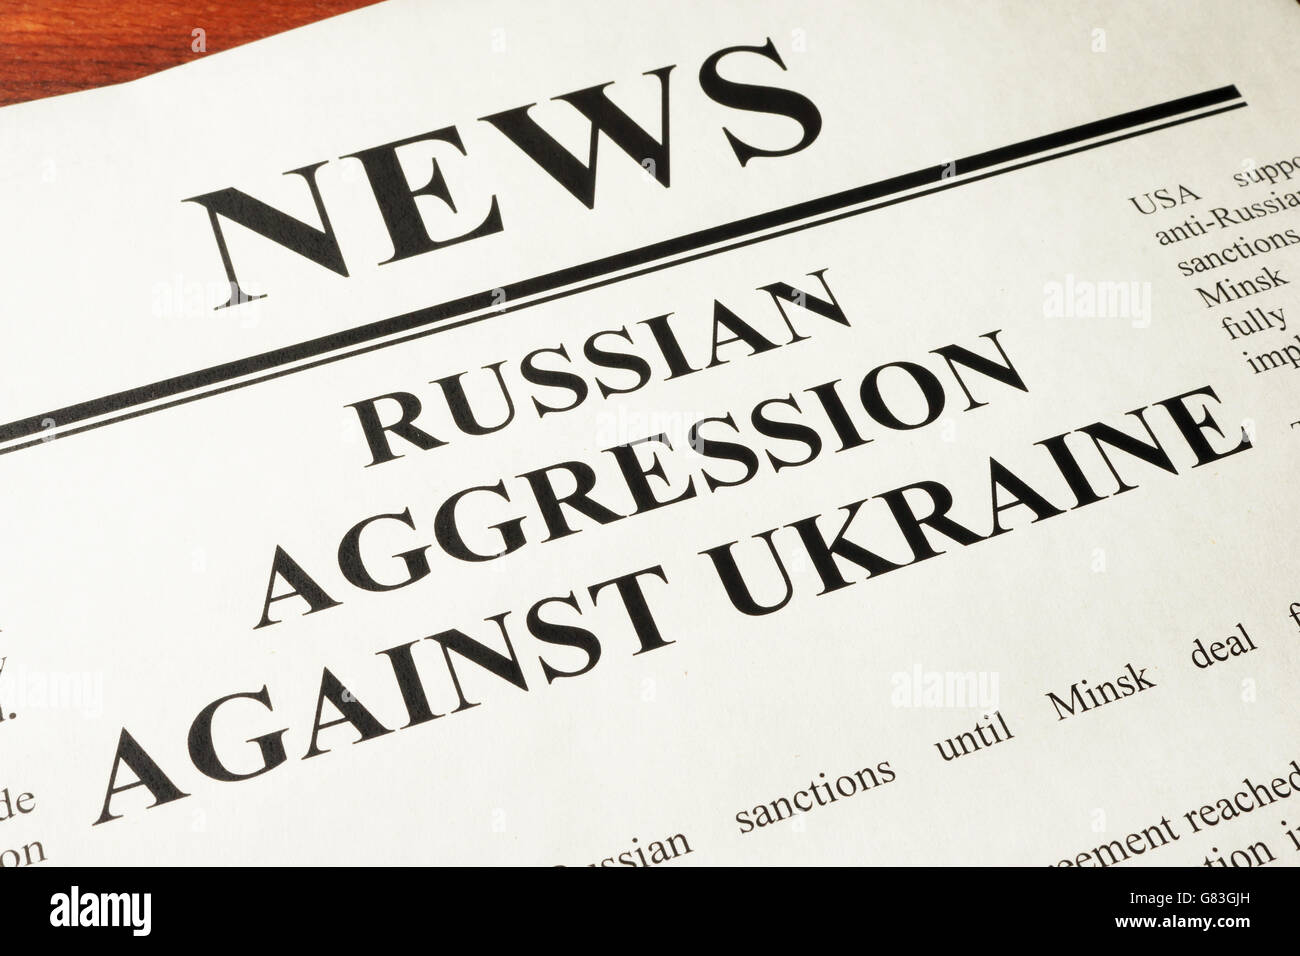 Newspaper with word news and Russian Aggression Against Ukraine. Stock Photo